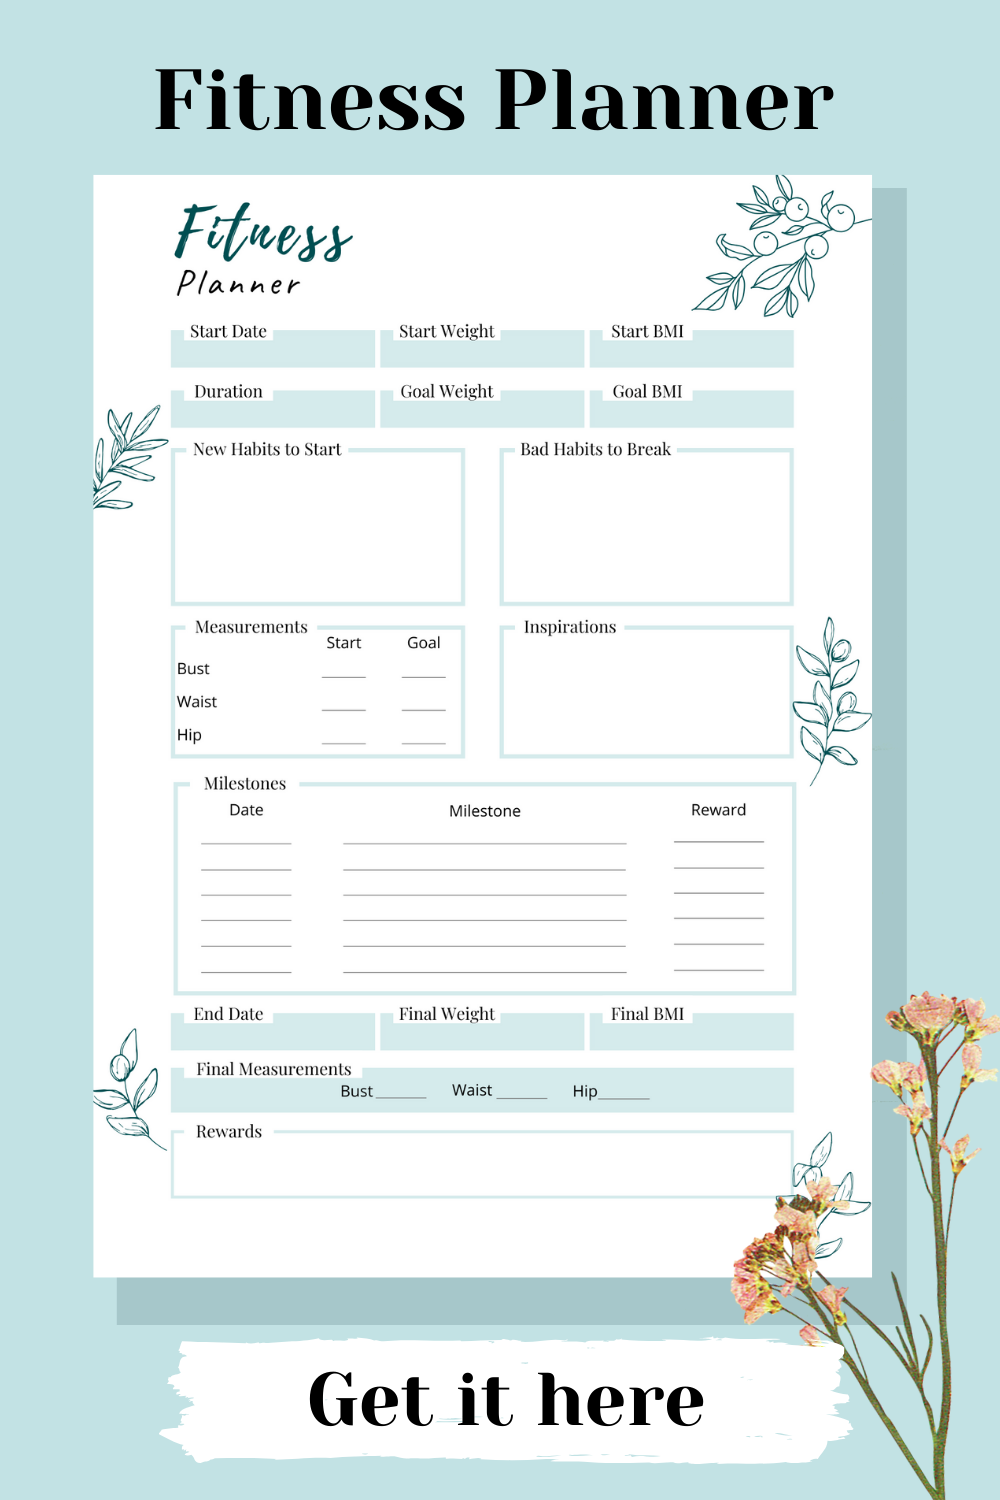 Weekly Daily Fitness Health Planner Template Bullet Journal Printable Schedule -   18 fitness Routine planner ideas